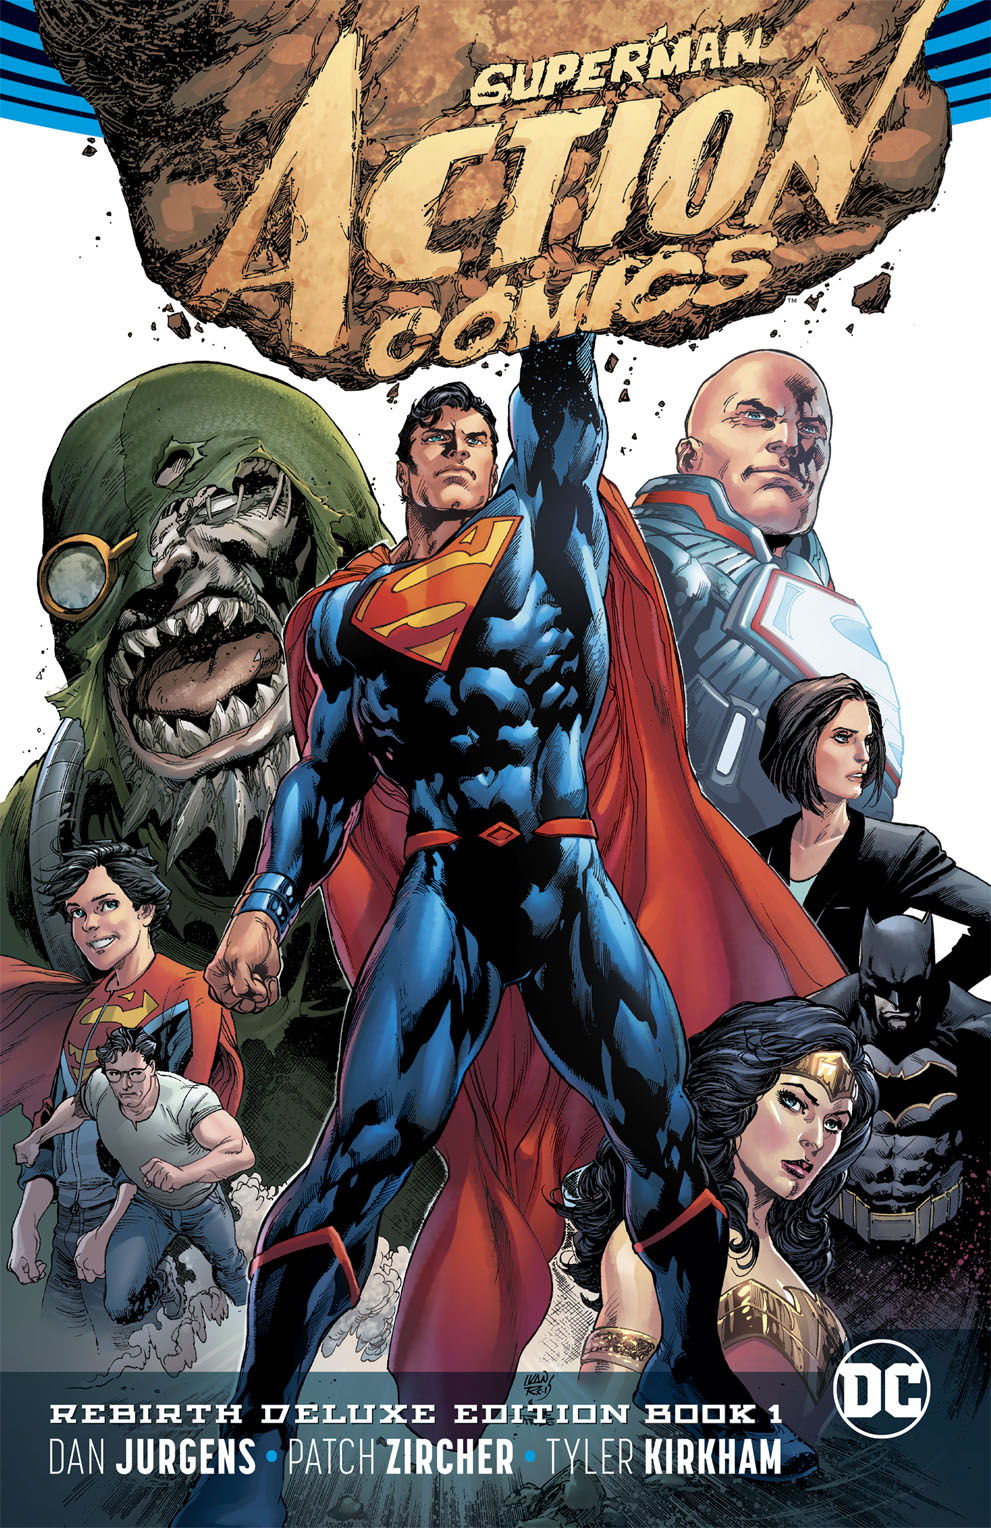 Superman - Action Comics: The Rebirth Deluxe Edition Book 1 (Rebirth) preview images